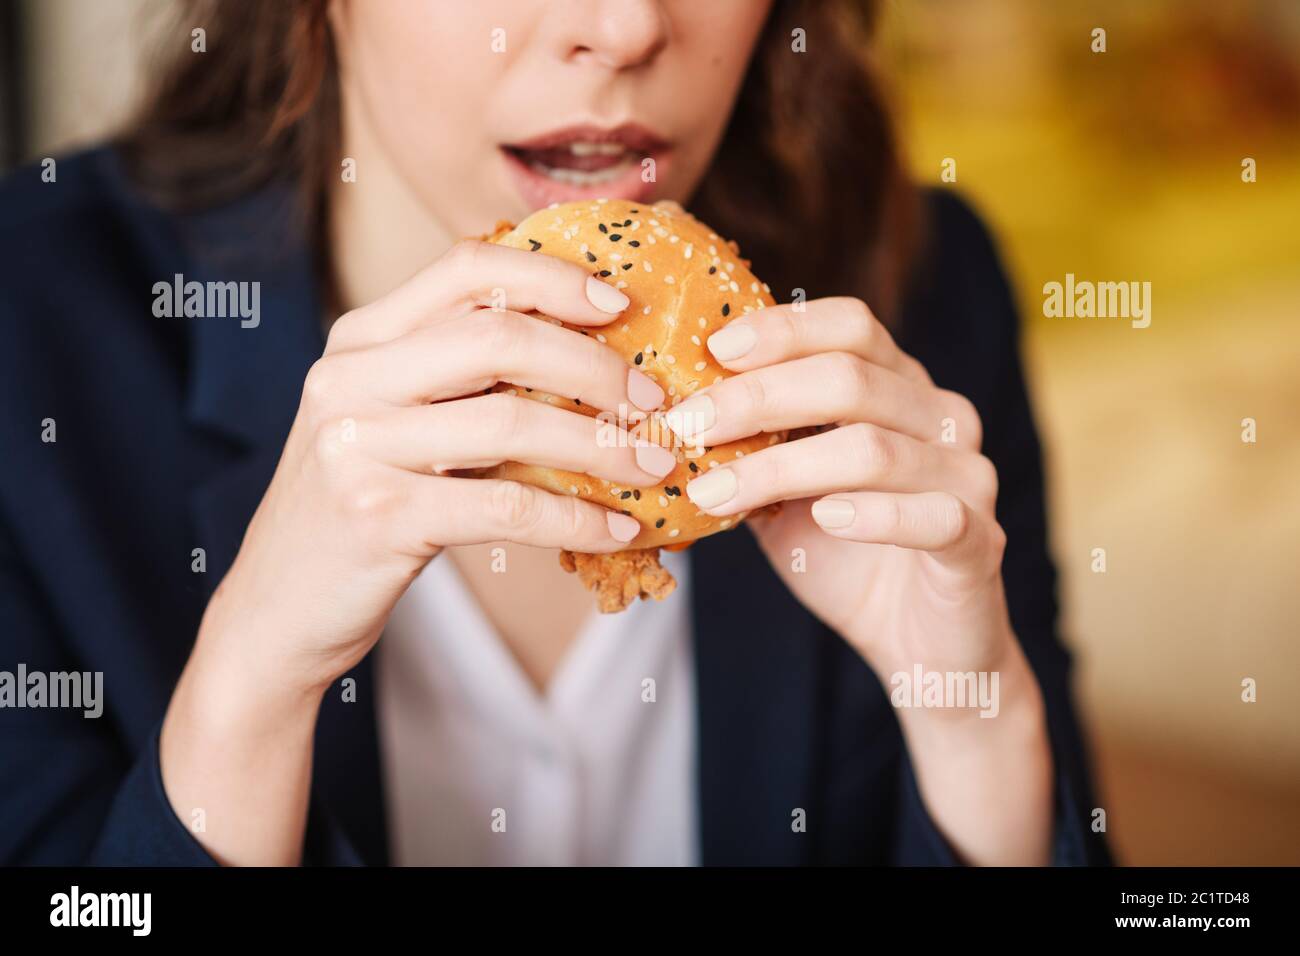 Female hands holding a burger near the mouth. Stock Photo